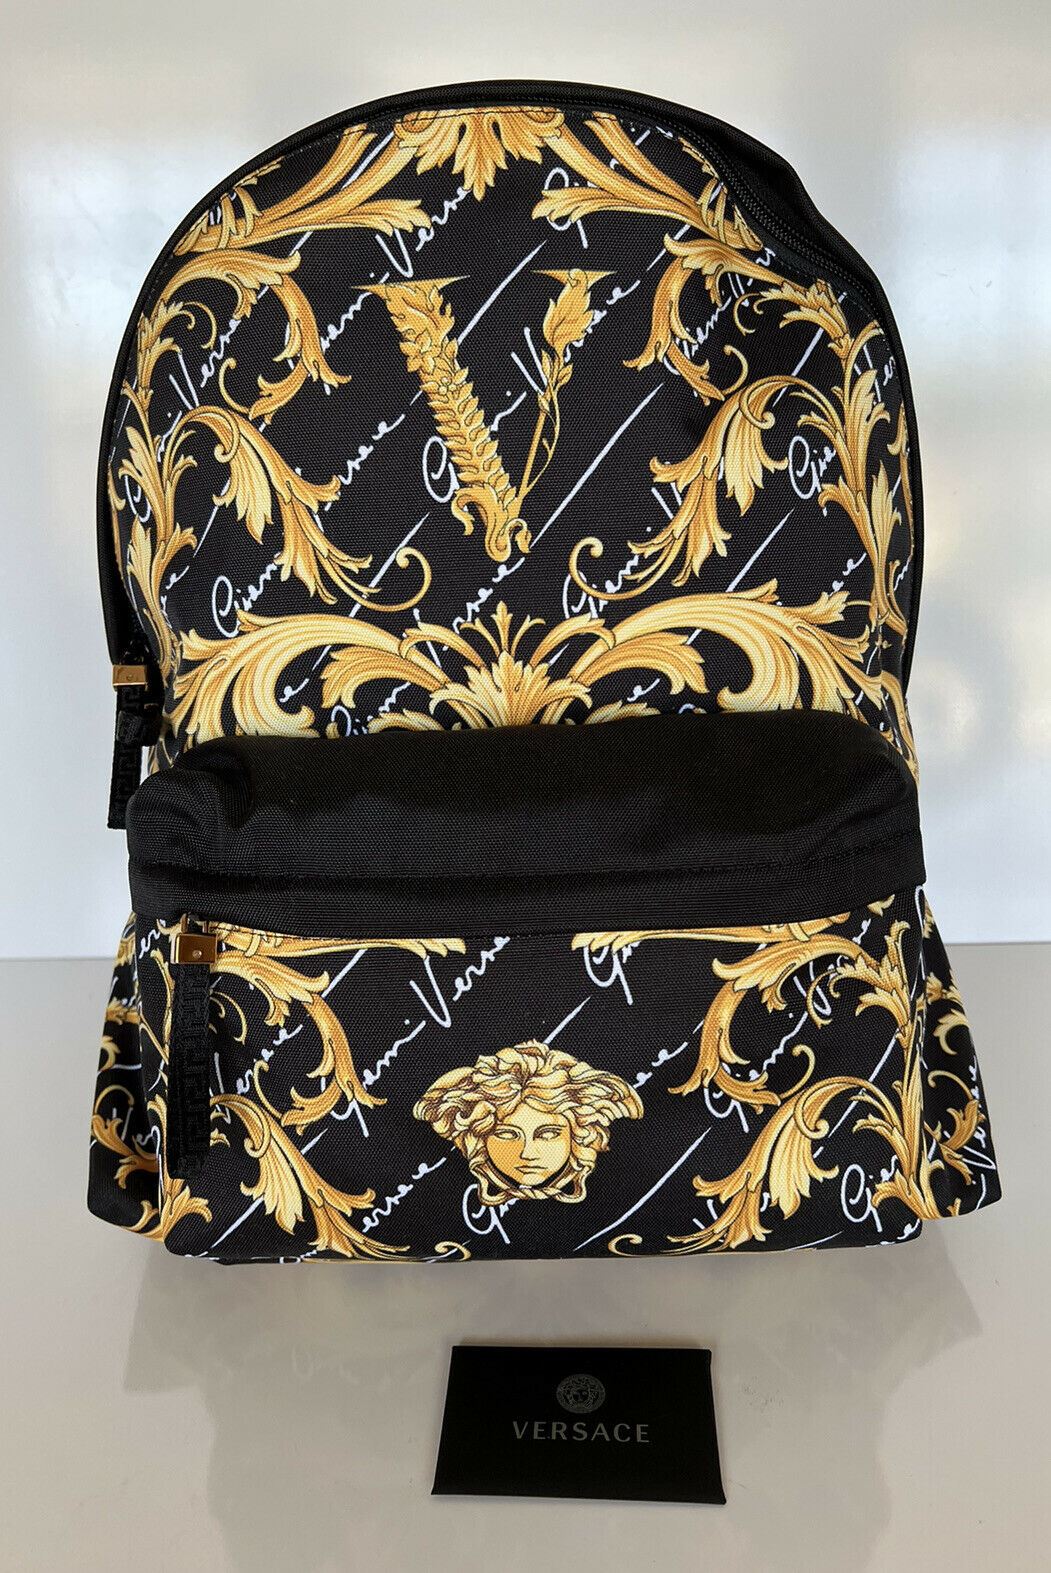 NWT $1150 Versace Barocco Signature Printed Nylon Backpack Made in Italy 1002886